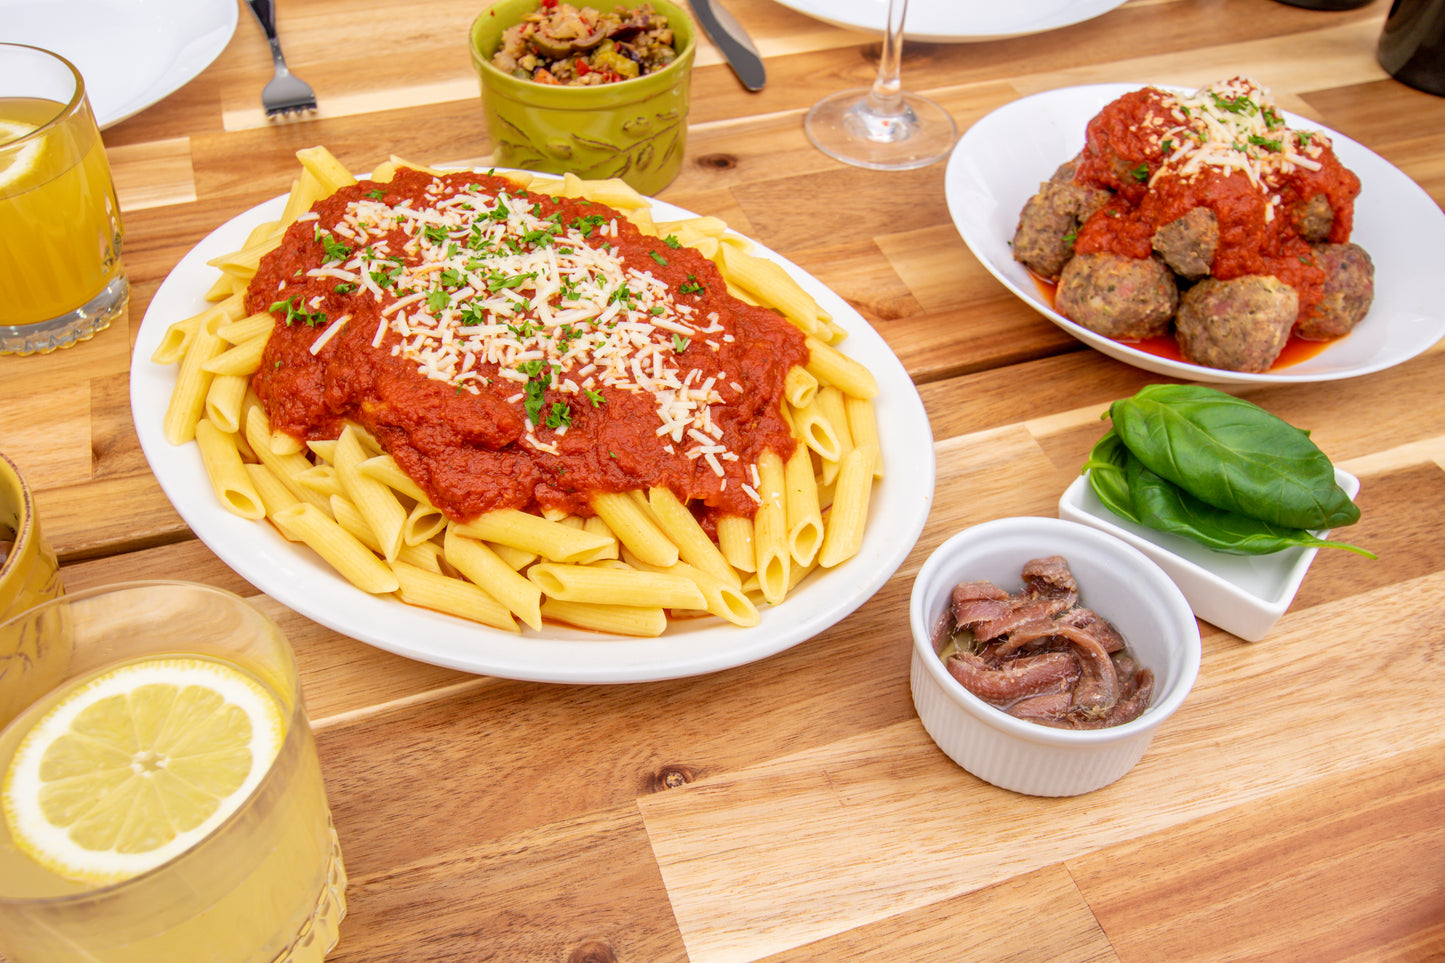 #1: Penne with Meatballs